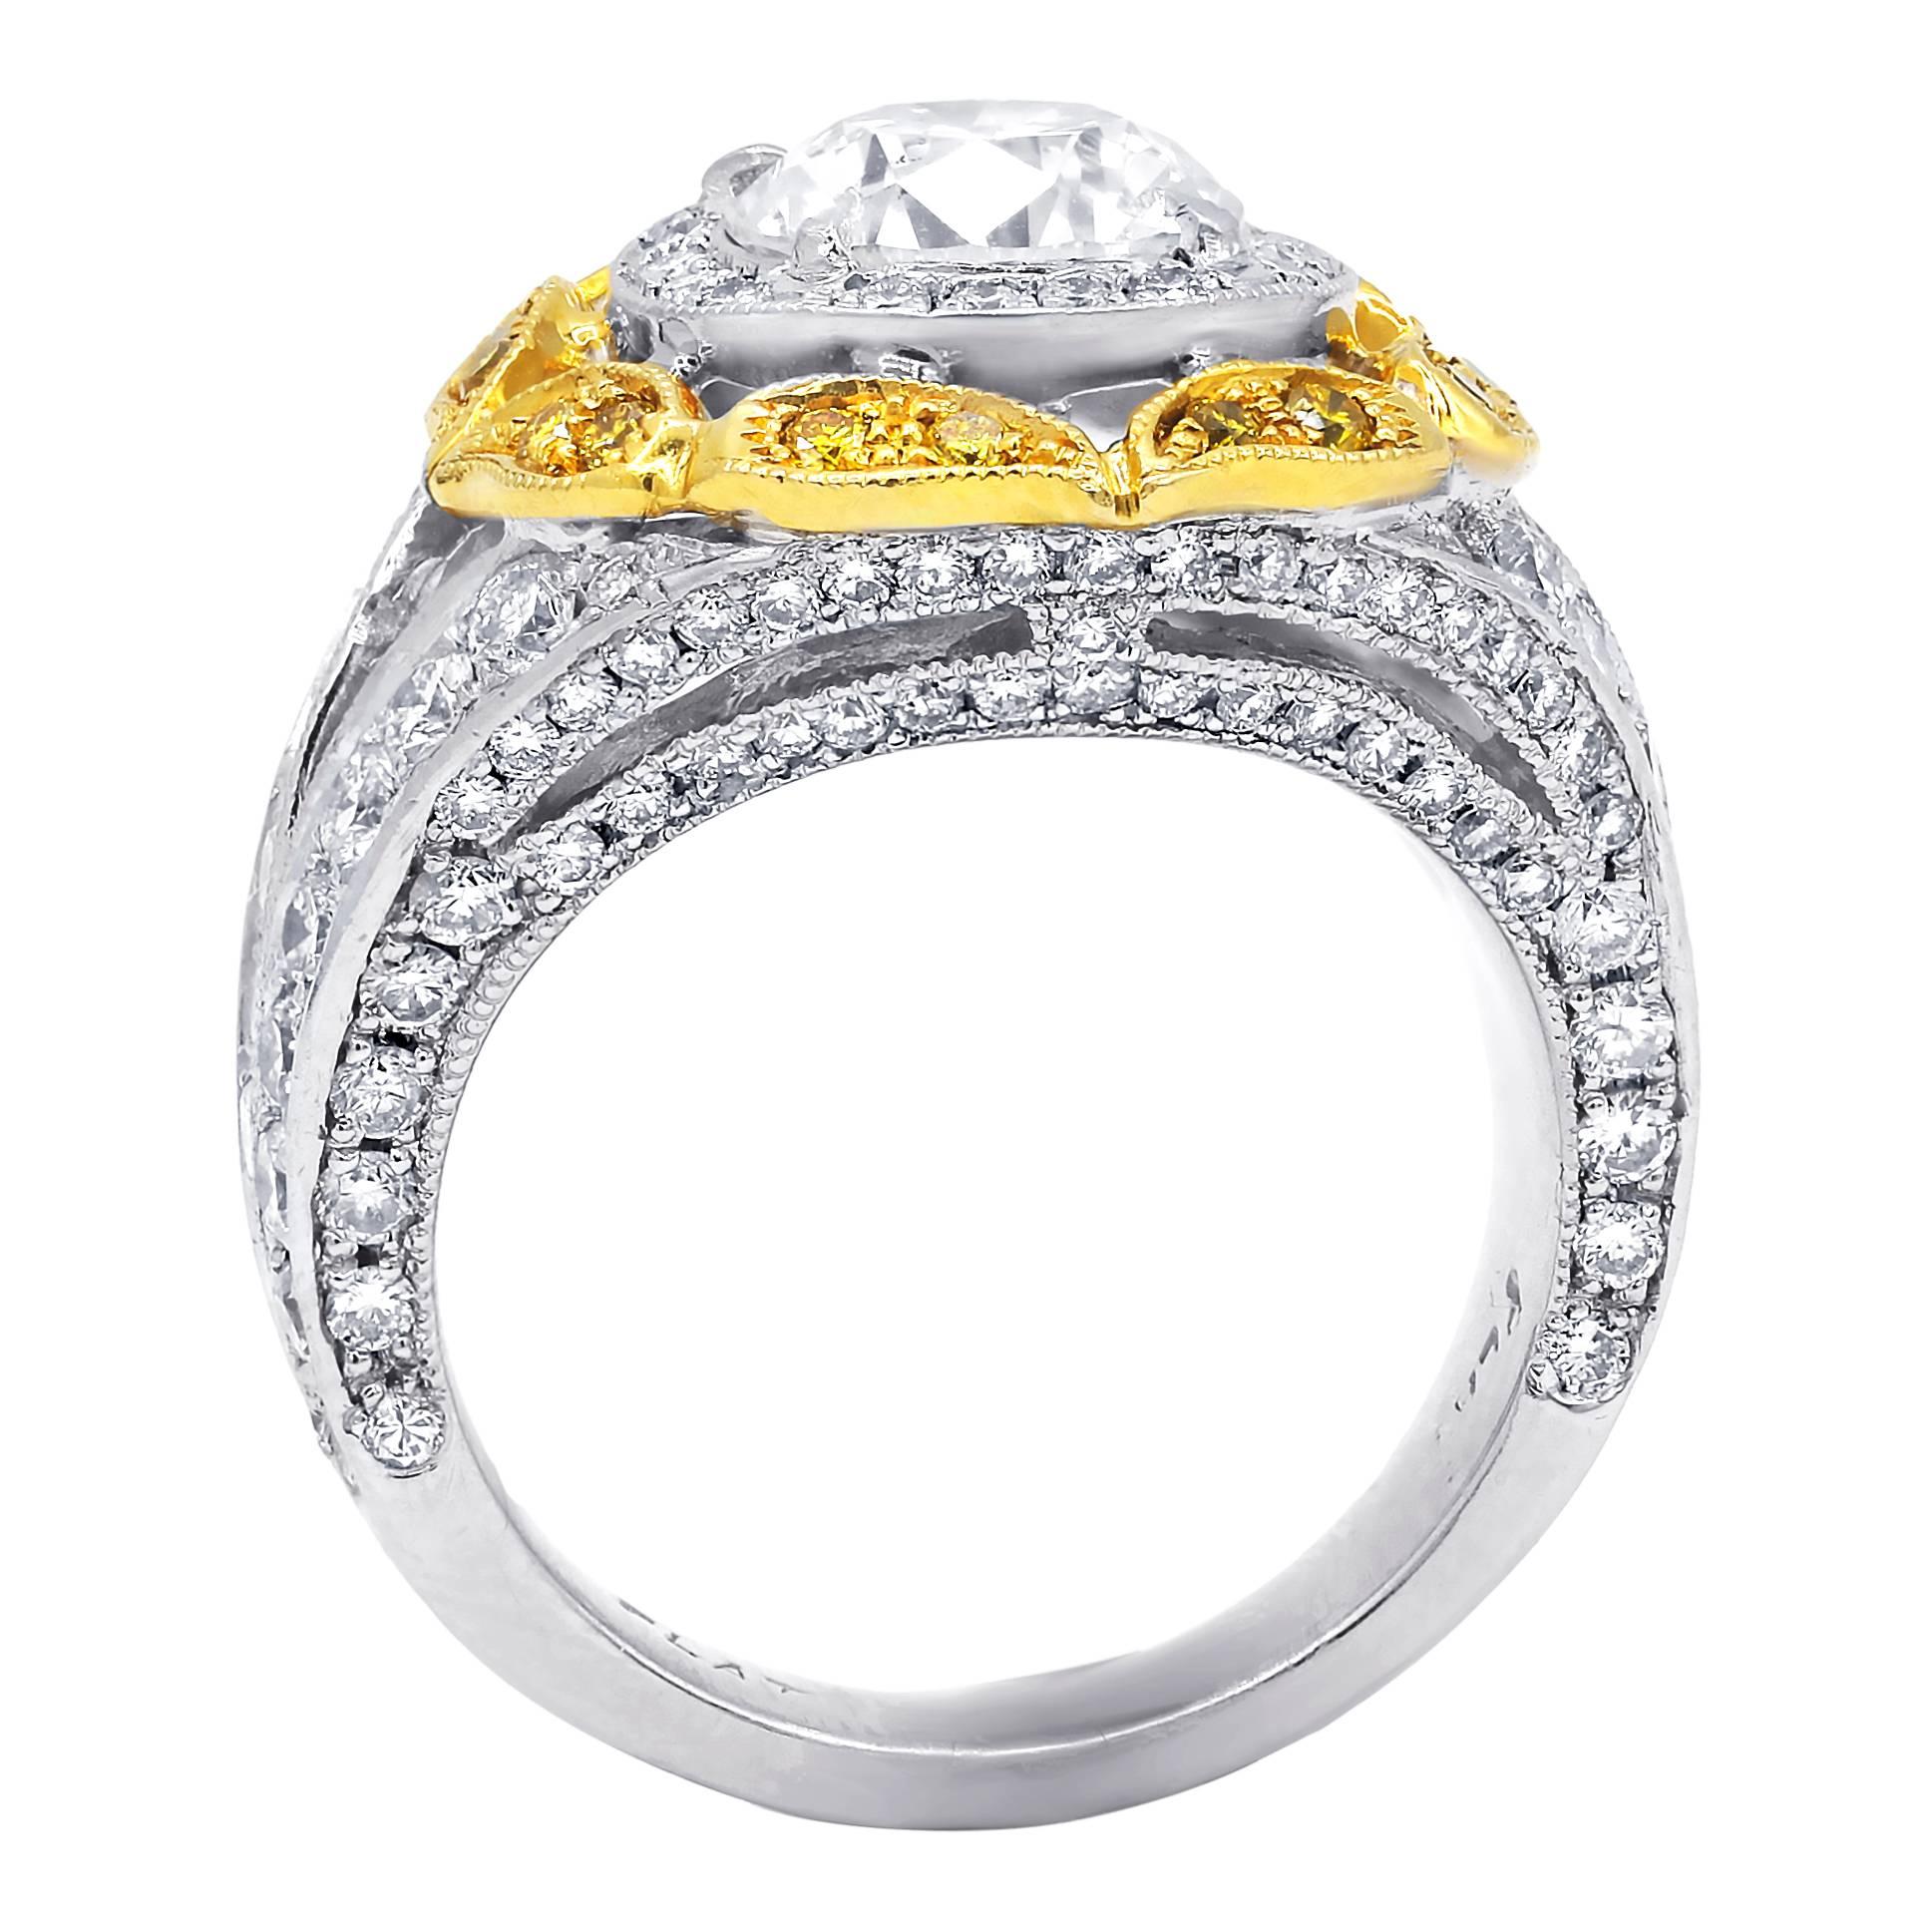 Round Cut Certified 4.35 Carat Two-Tone Halo Diamond Ring For Sale